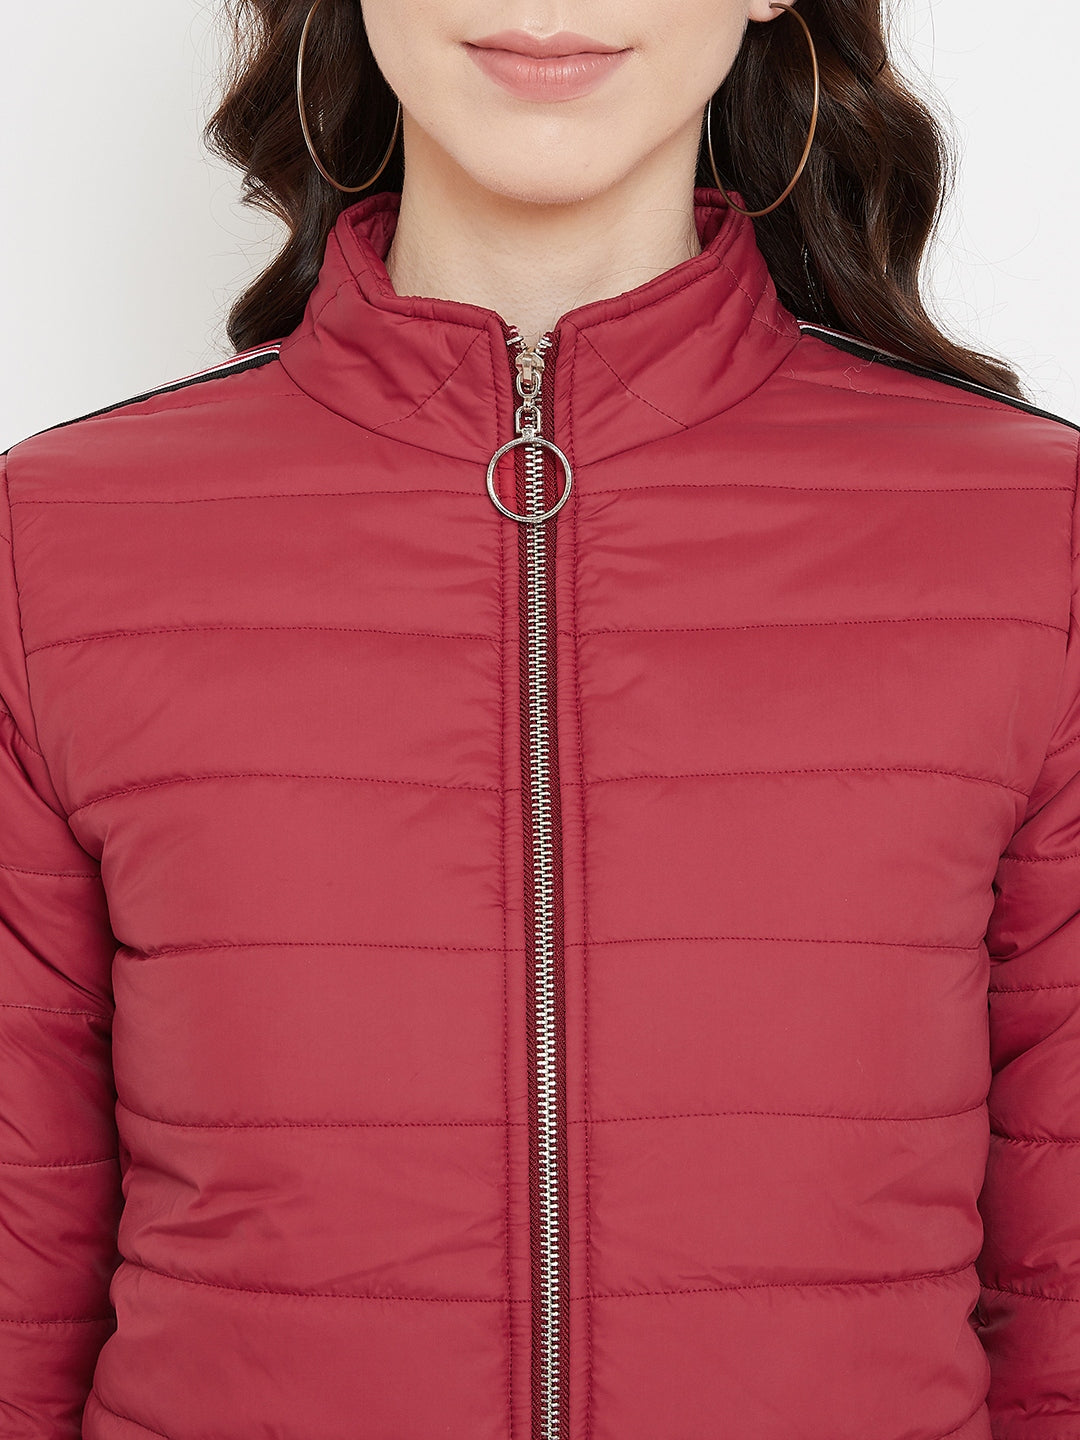 Austin Wood Women's Red Solid Full Sleeves High Neck Padded Jacket With Size Tape